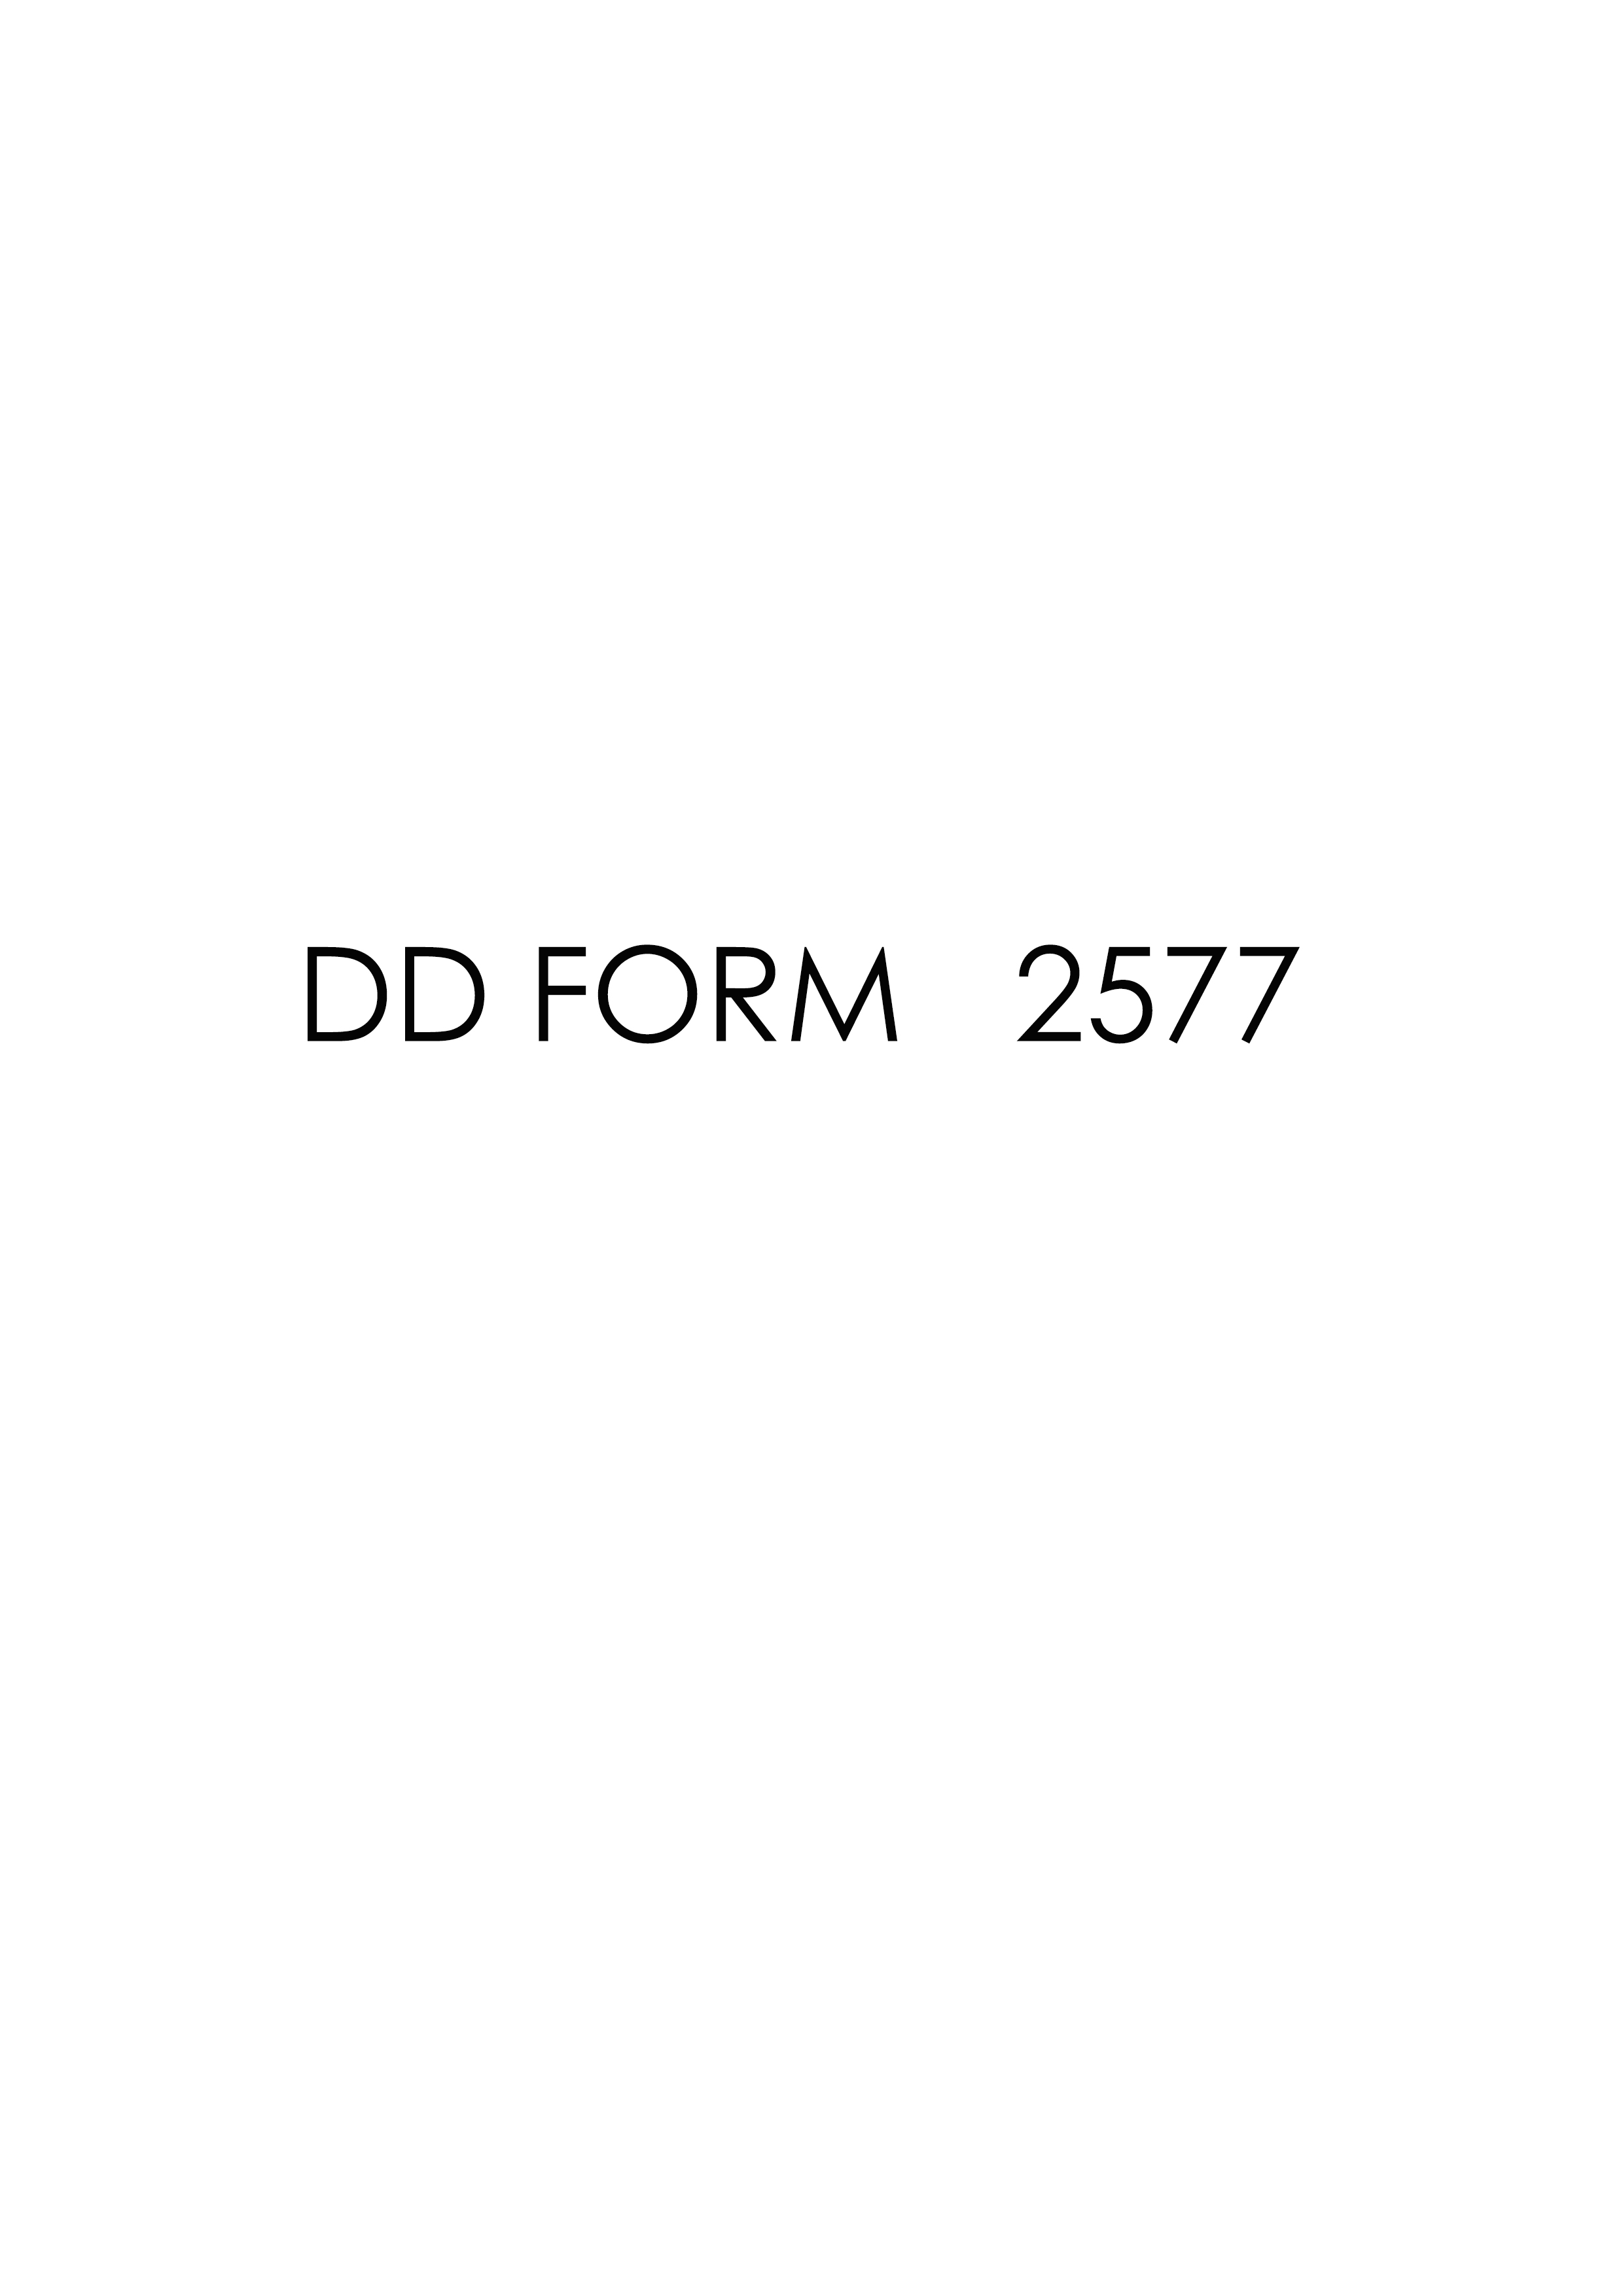 Download Fillable dd Form 2577